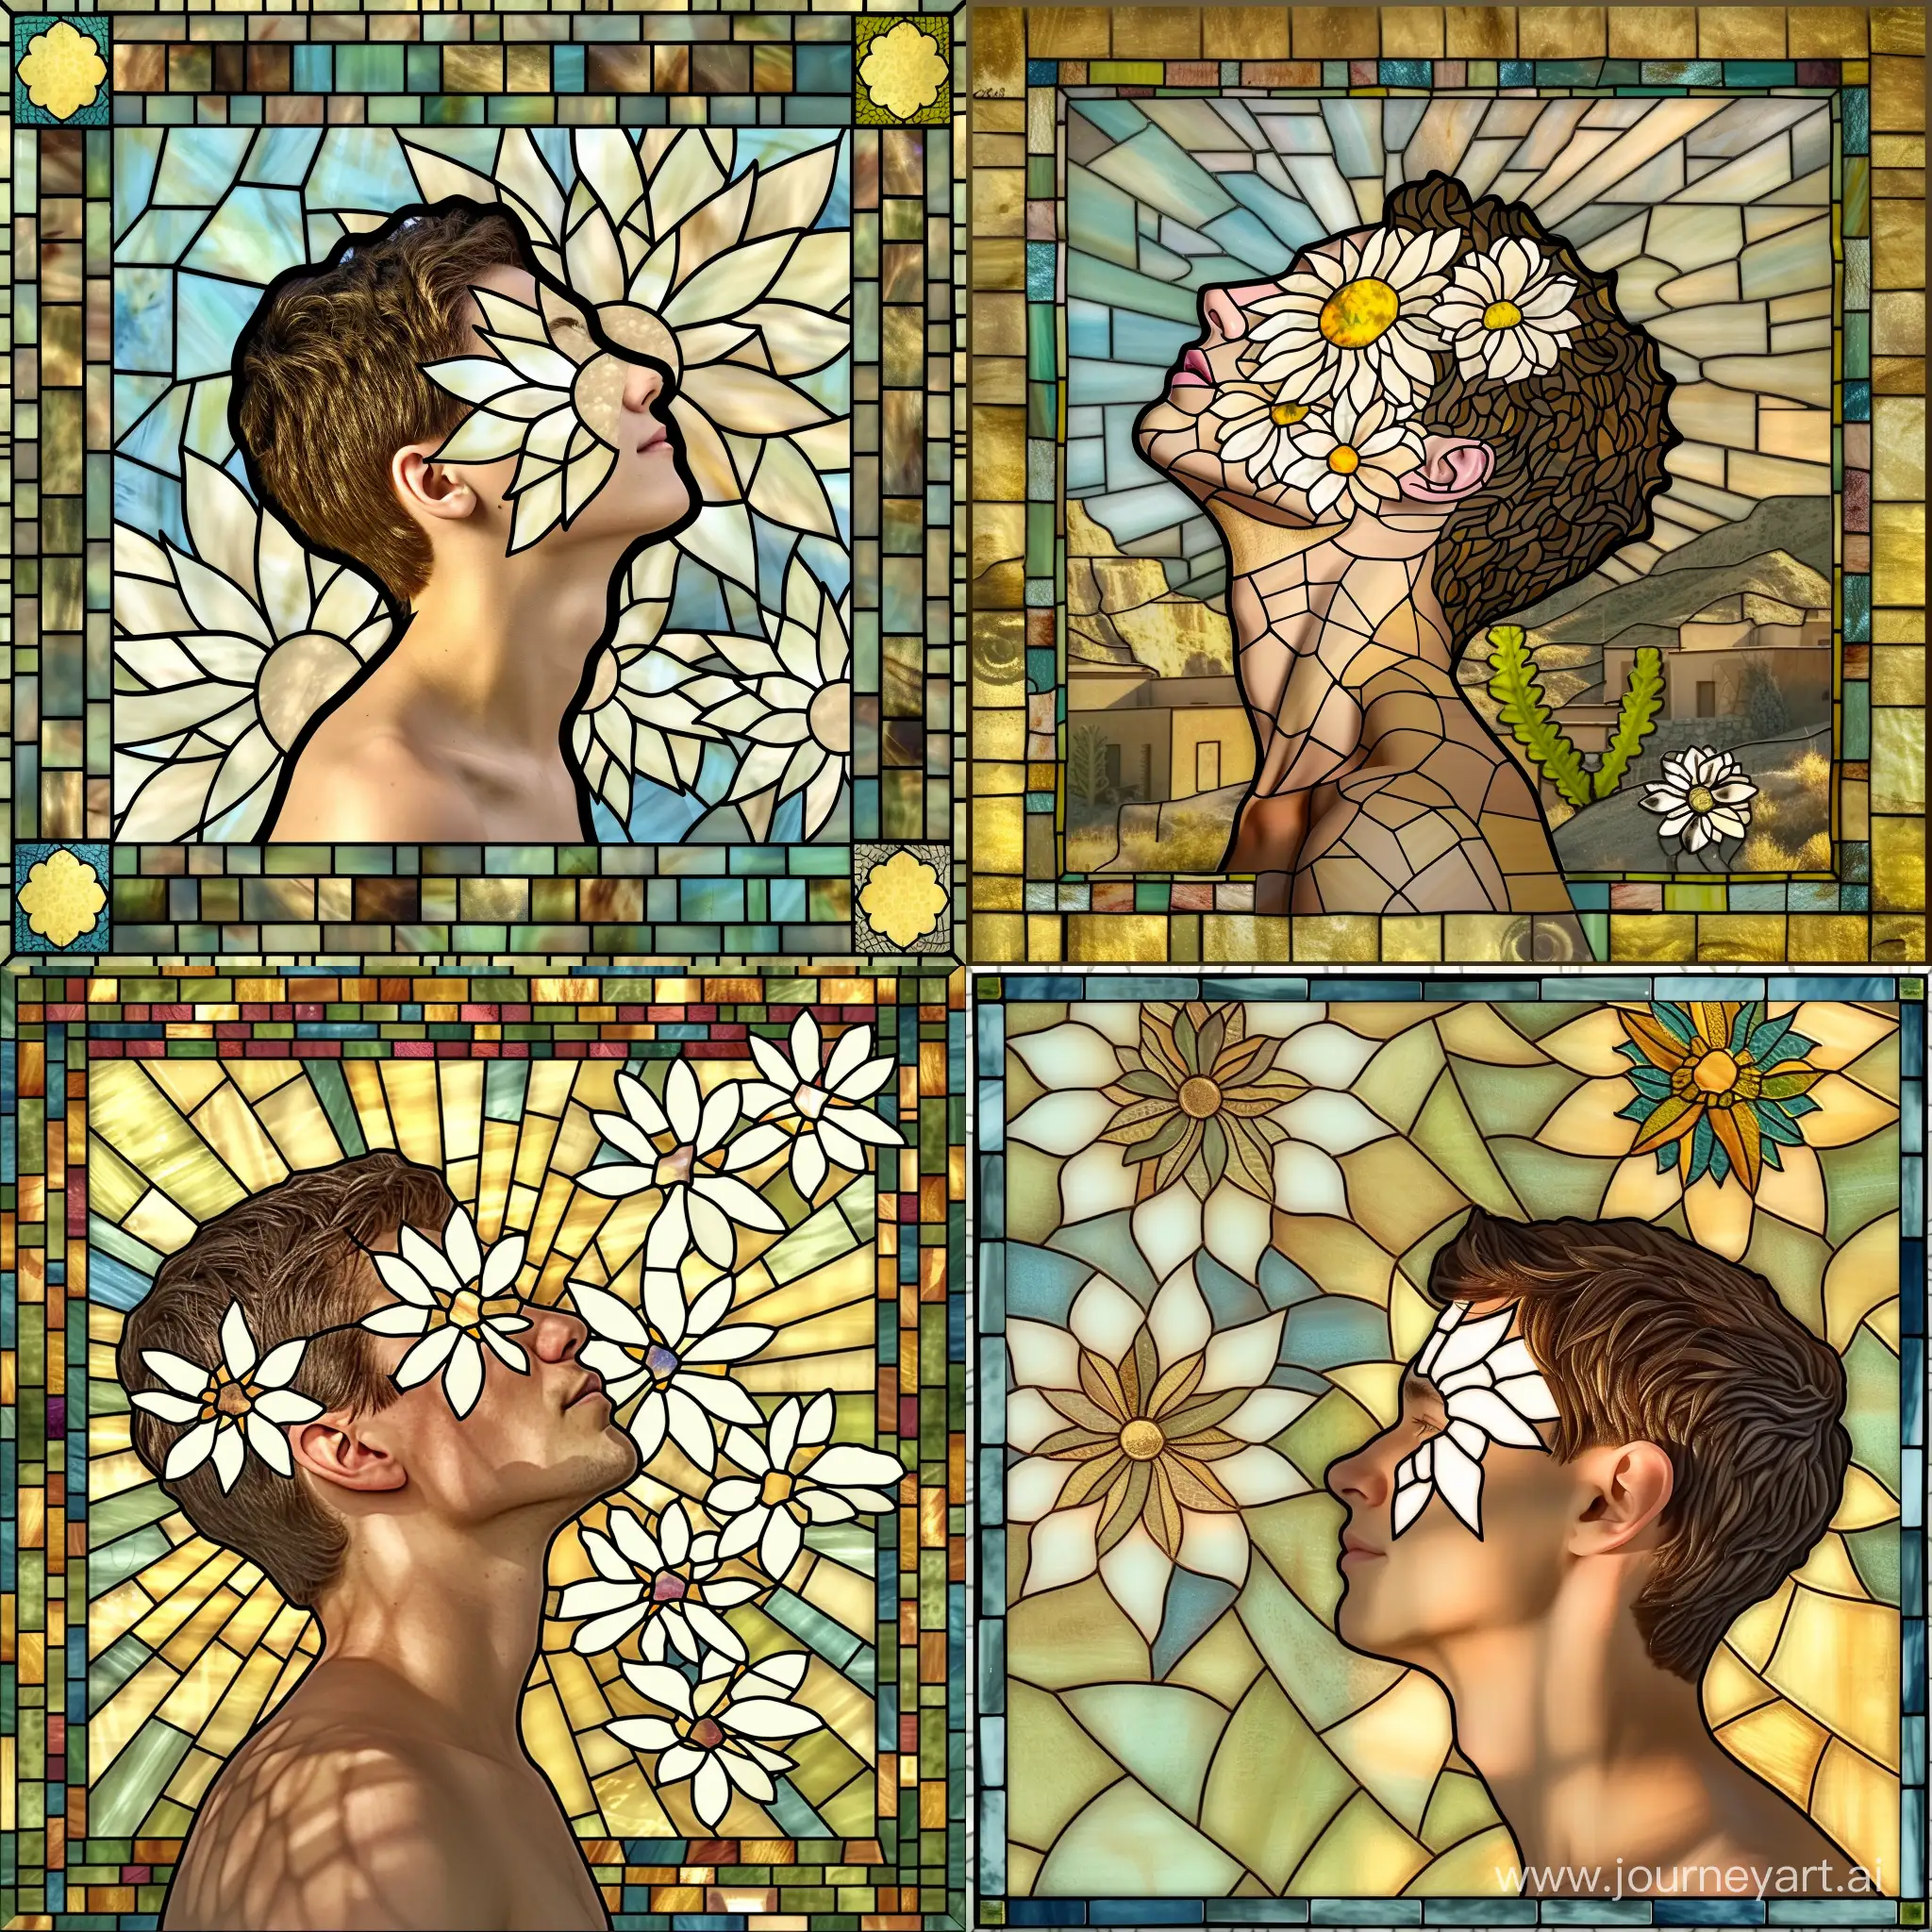 A man facing slightly upwards, a man with short, dark, wavy hair,no shirt,his eyes are covered with white flowers,the flowers has multiple petals,Stained glass art,square shape --sref https://cdn.discordapp.com/attachments/1187305629551972372/1206110322973220904/Spirit_Of_Love.jpg?ex=65dad0c5&is=65c85bc5&hm=735e0215476dcd8471c65b6e40c353c13049f0a03fb027496150d8c53f5daac2& --sw 1000